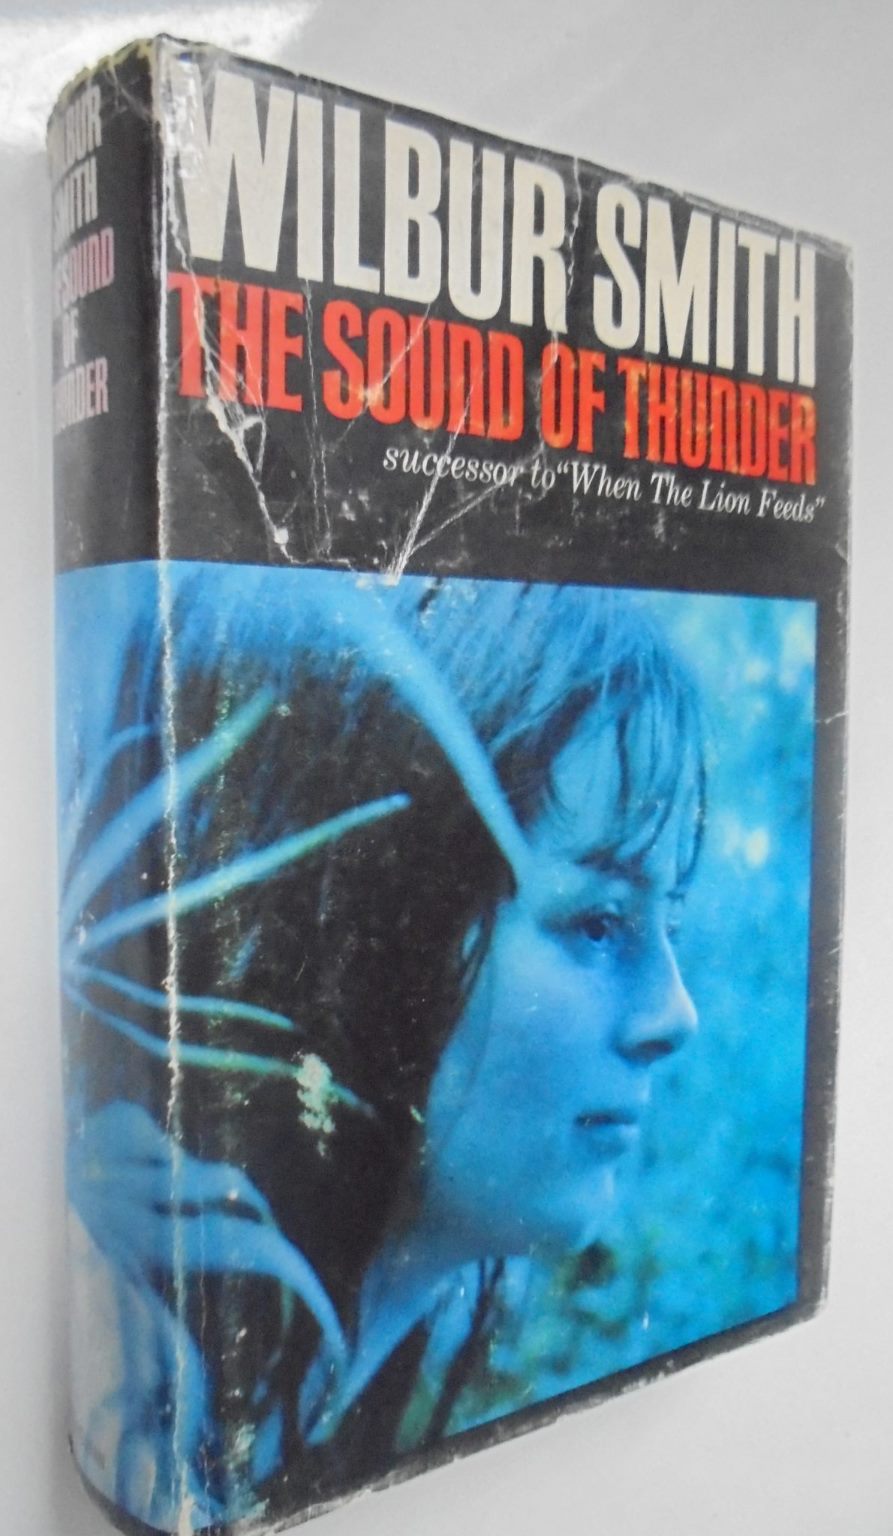 The Sound of Thunder. First Edition (1966) by Wilbur Smith FIRST PRINTING. SCARCE.